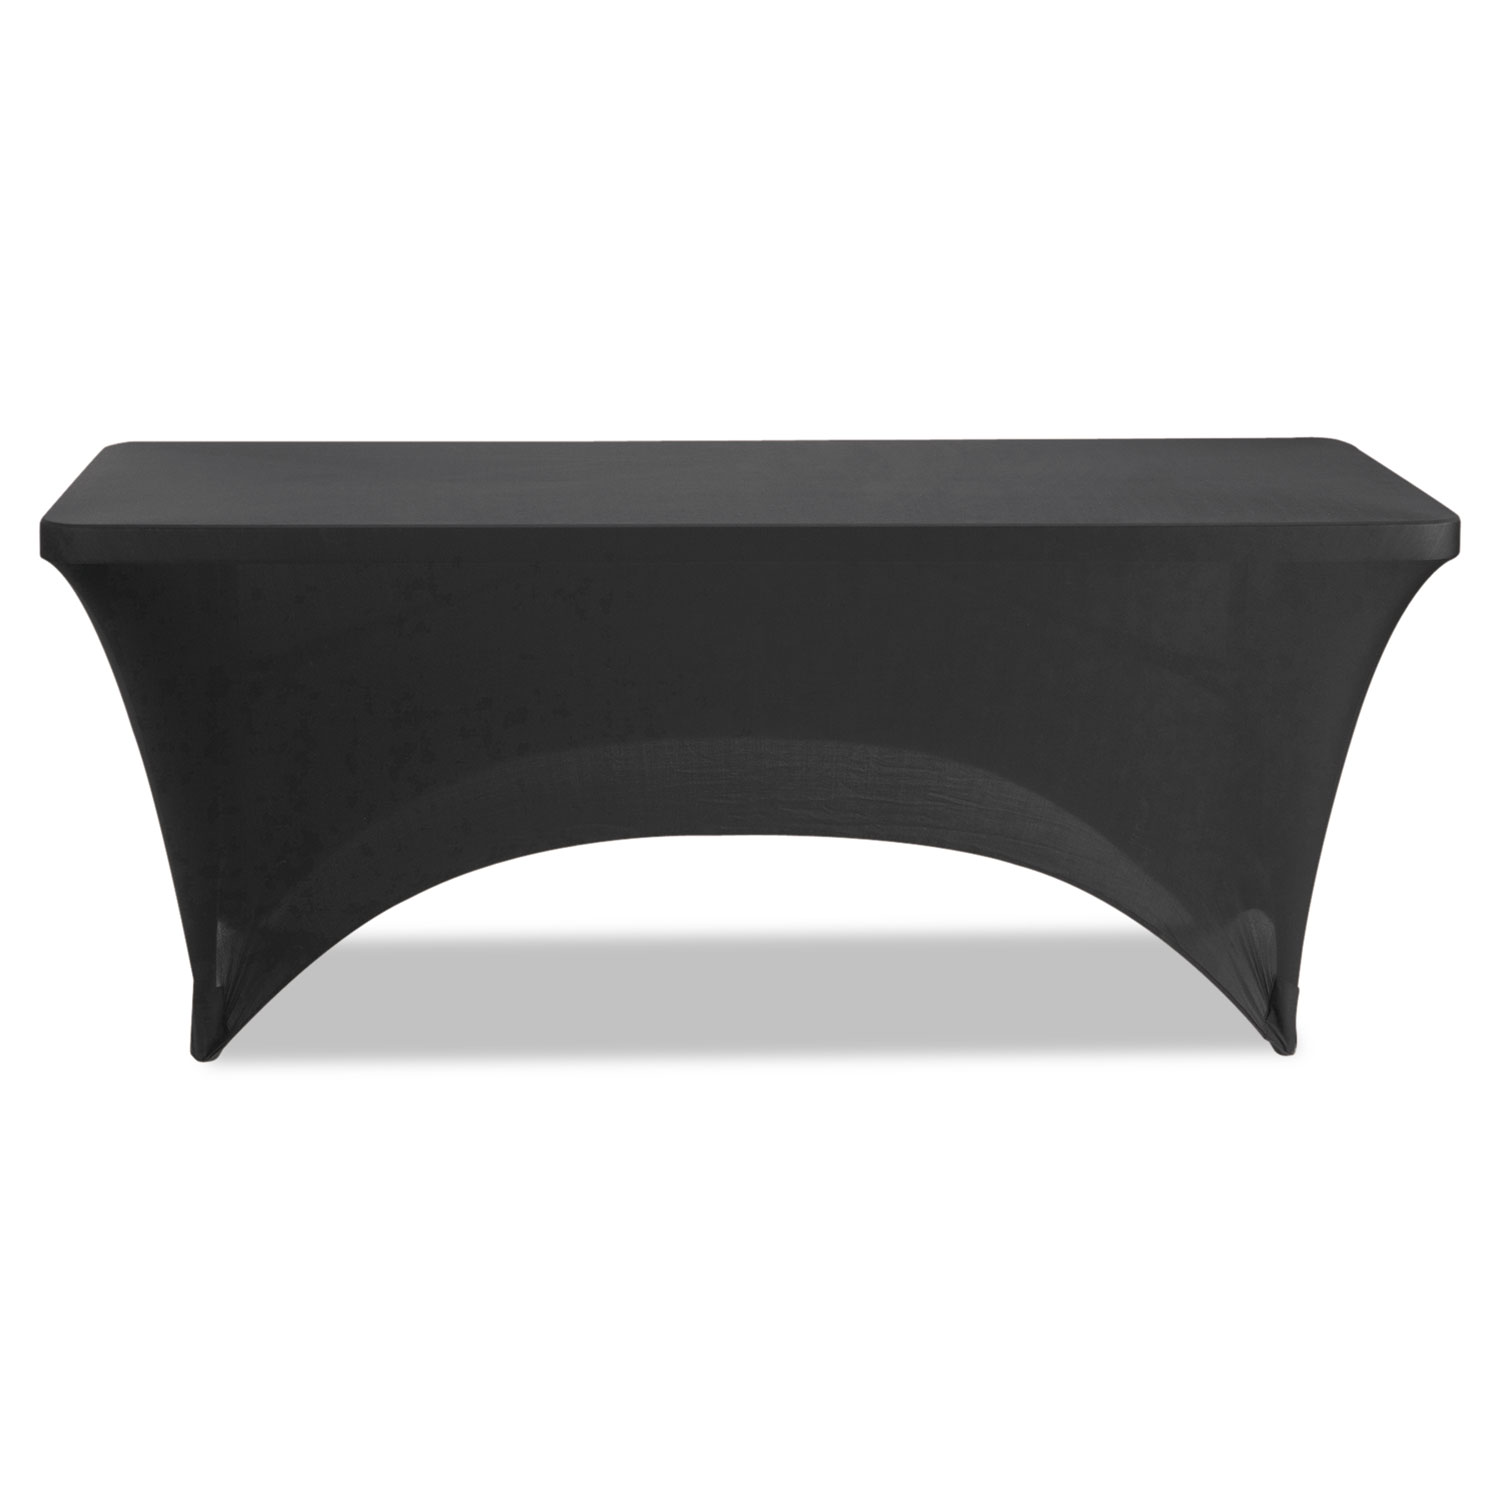  Iceberg 16521 Stretch-Fabric Table Cover, Polyester/Spandex, 30 x 72, Black (ICE16521) 